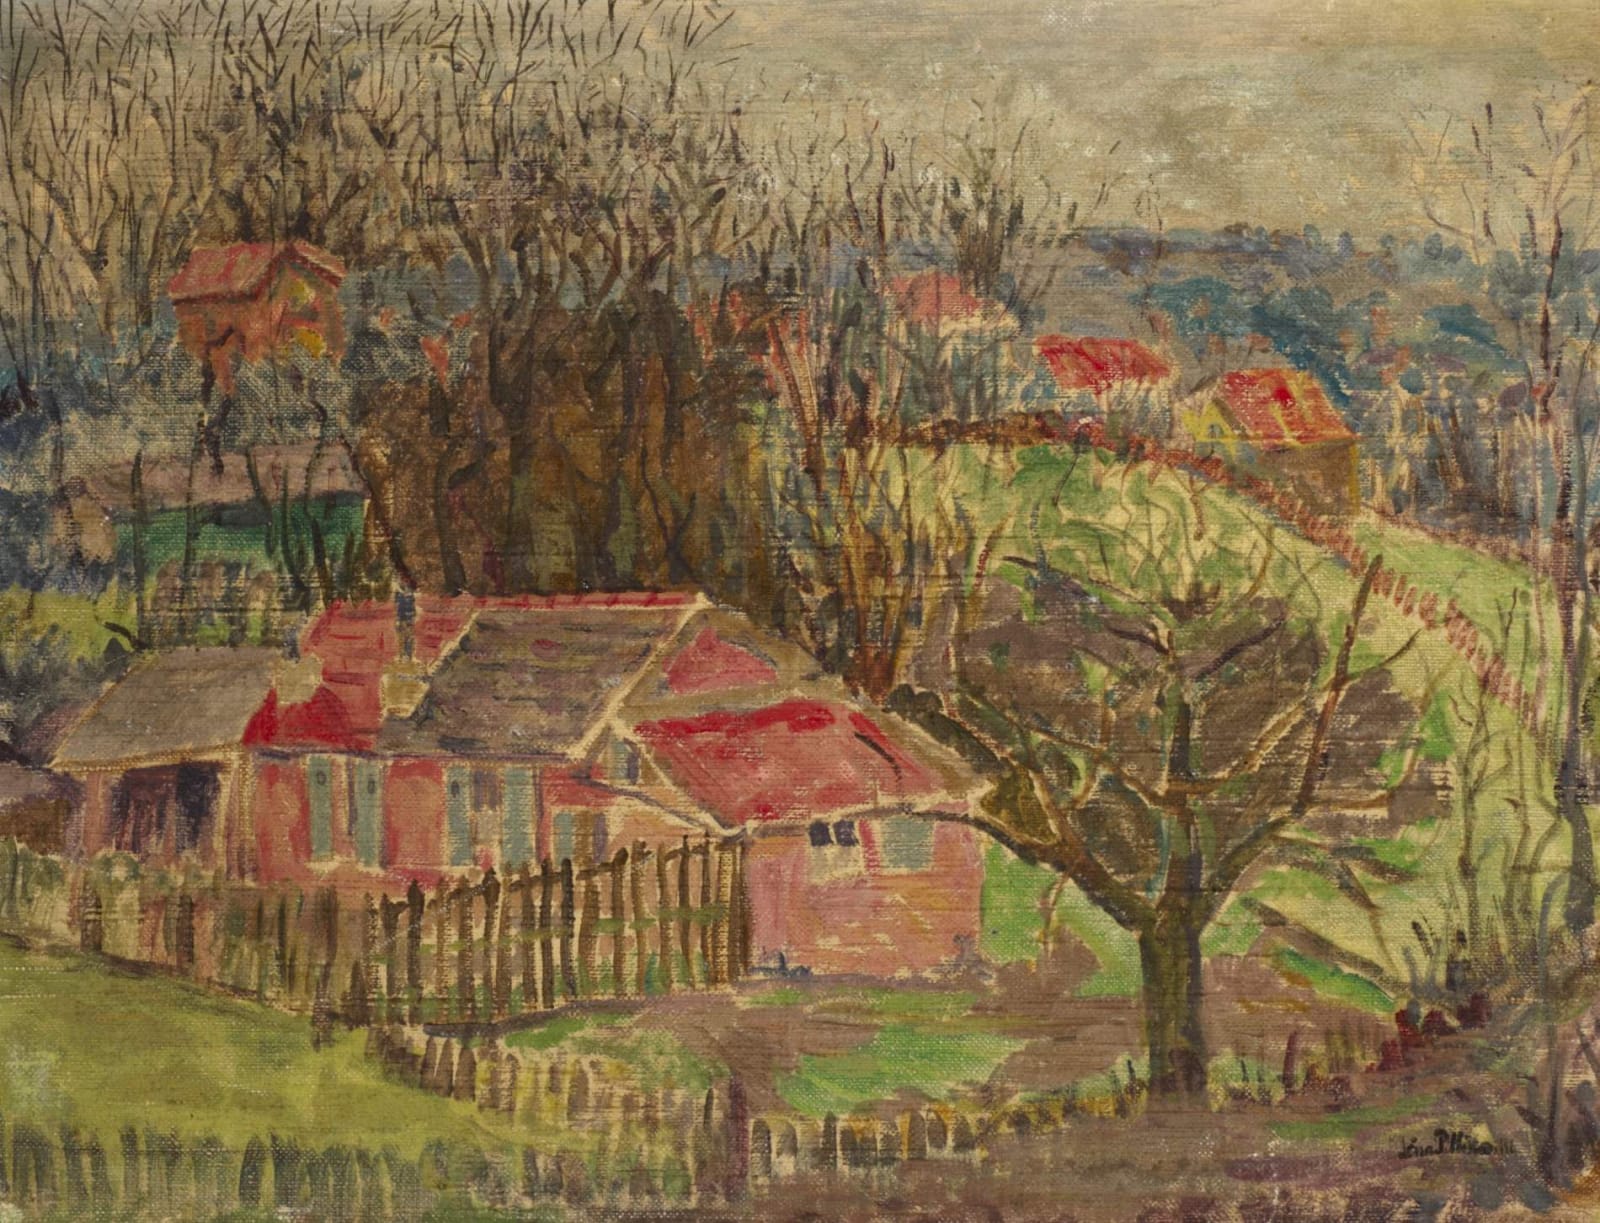 Lena Pillico (1884-1947) Cottages in the Country 1932 Oil on canvas 57 x 71 cm Ben Uri Collection © Lena Pillico estate To see and discover more about this artist click here